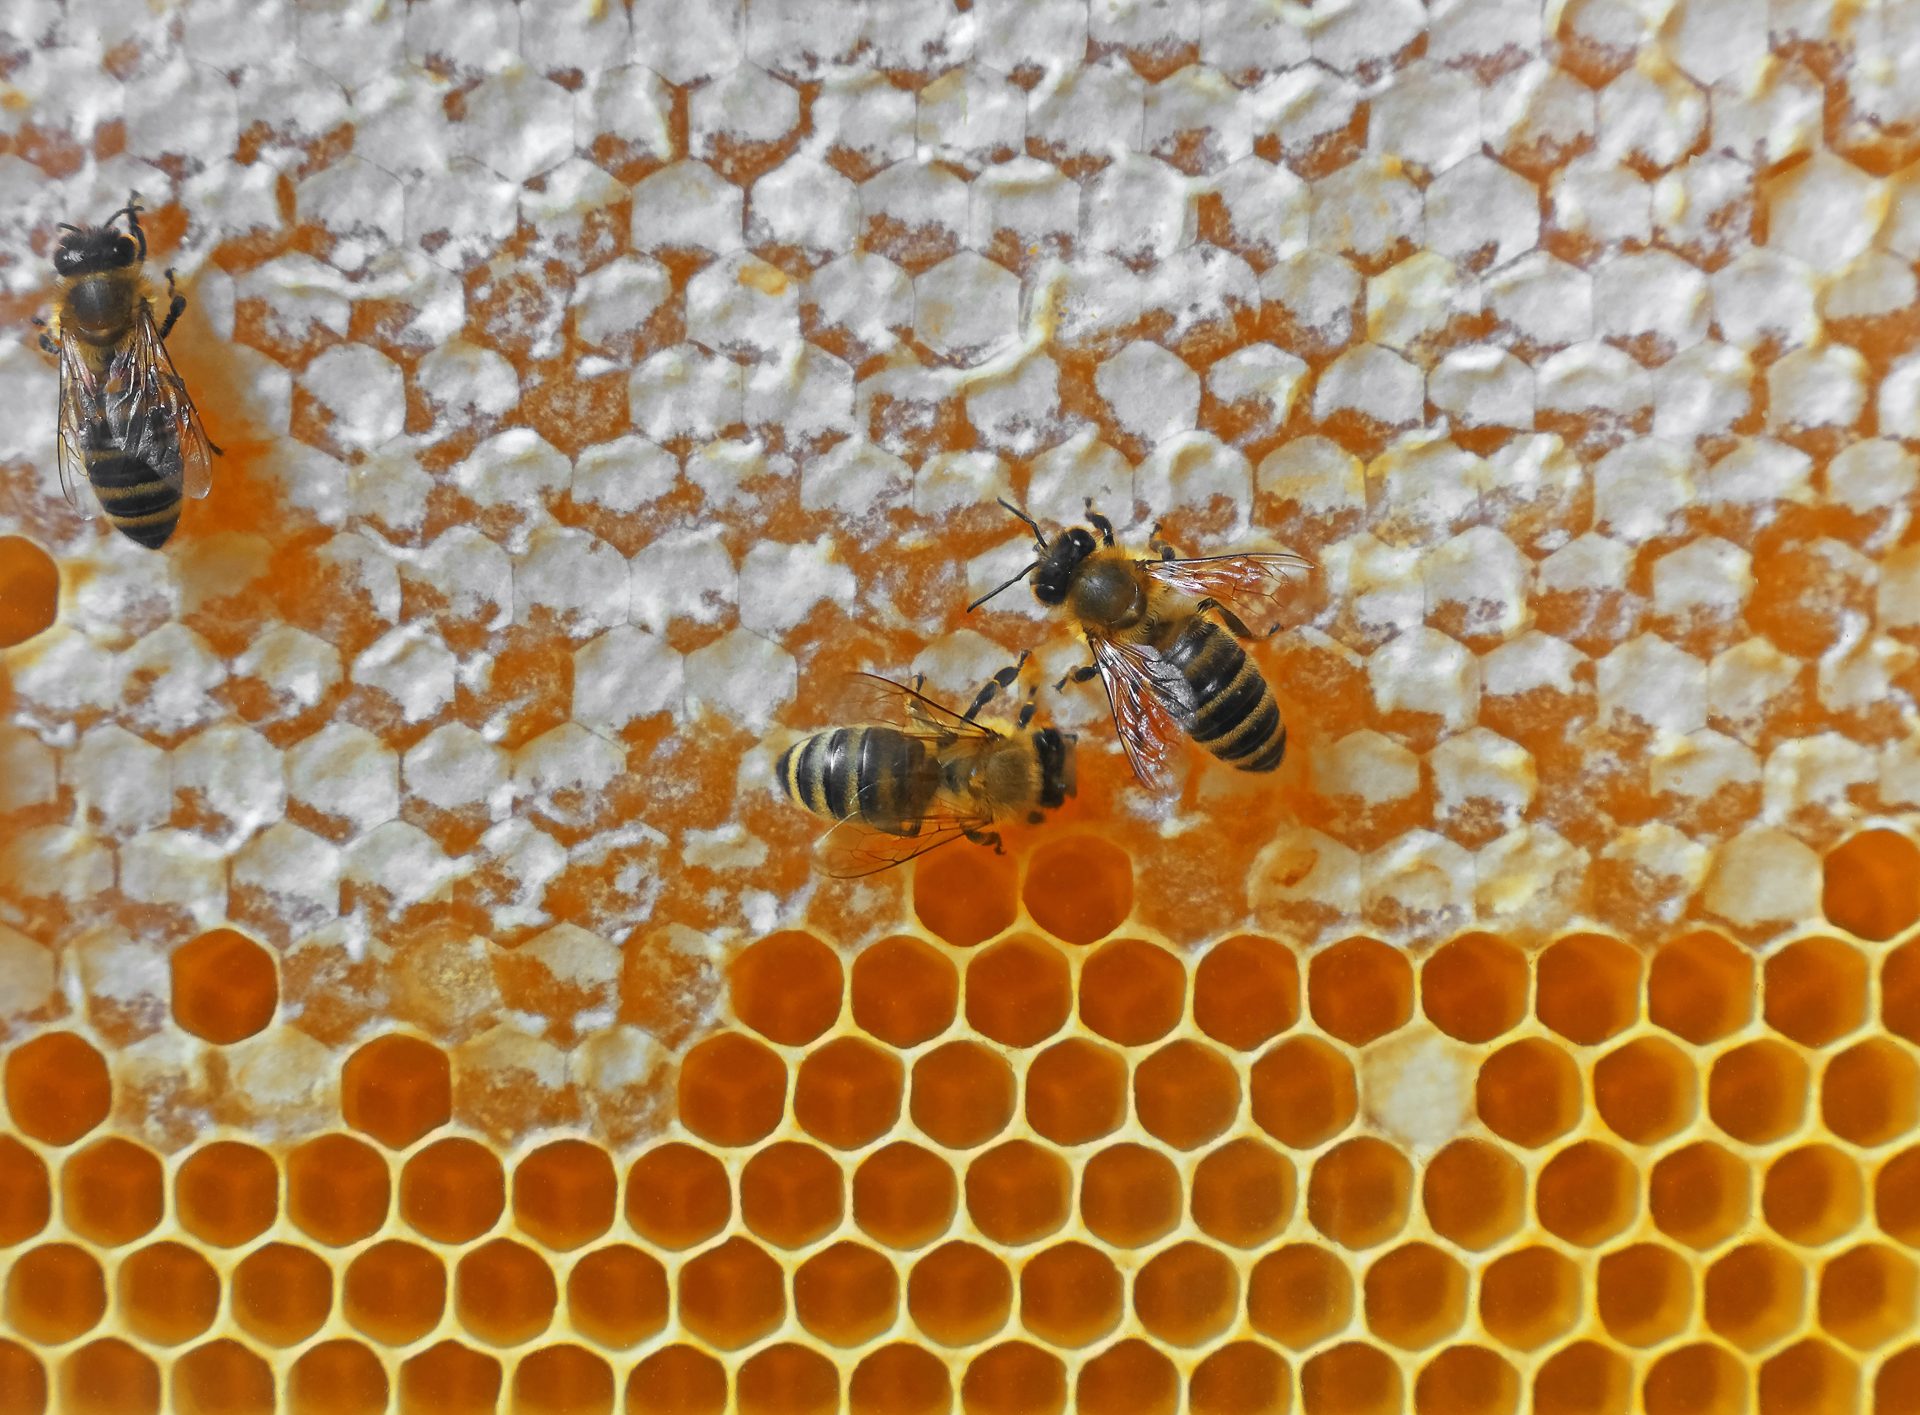 Is Harvesting Honey Bad for Bees